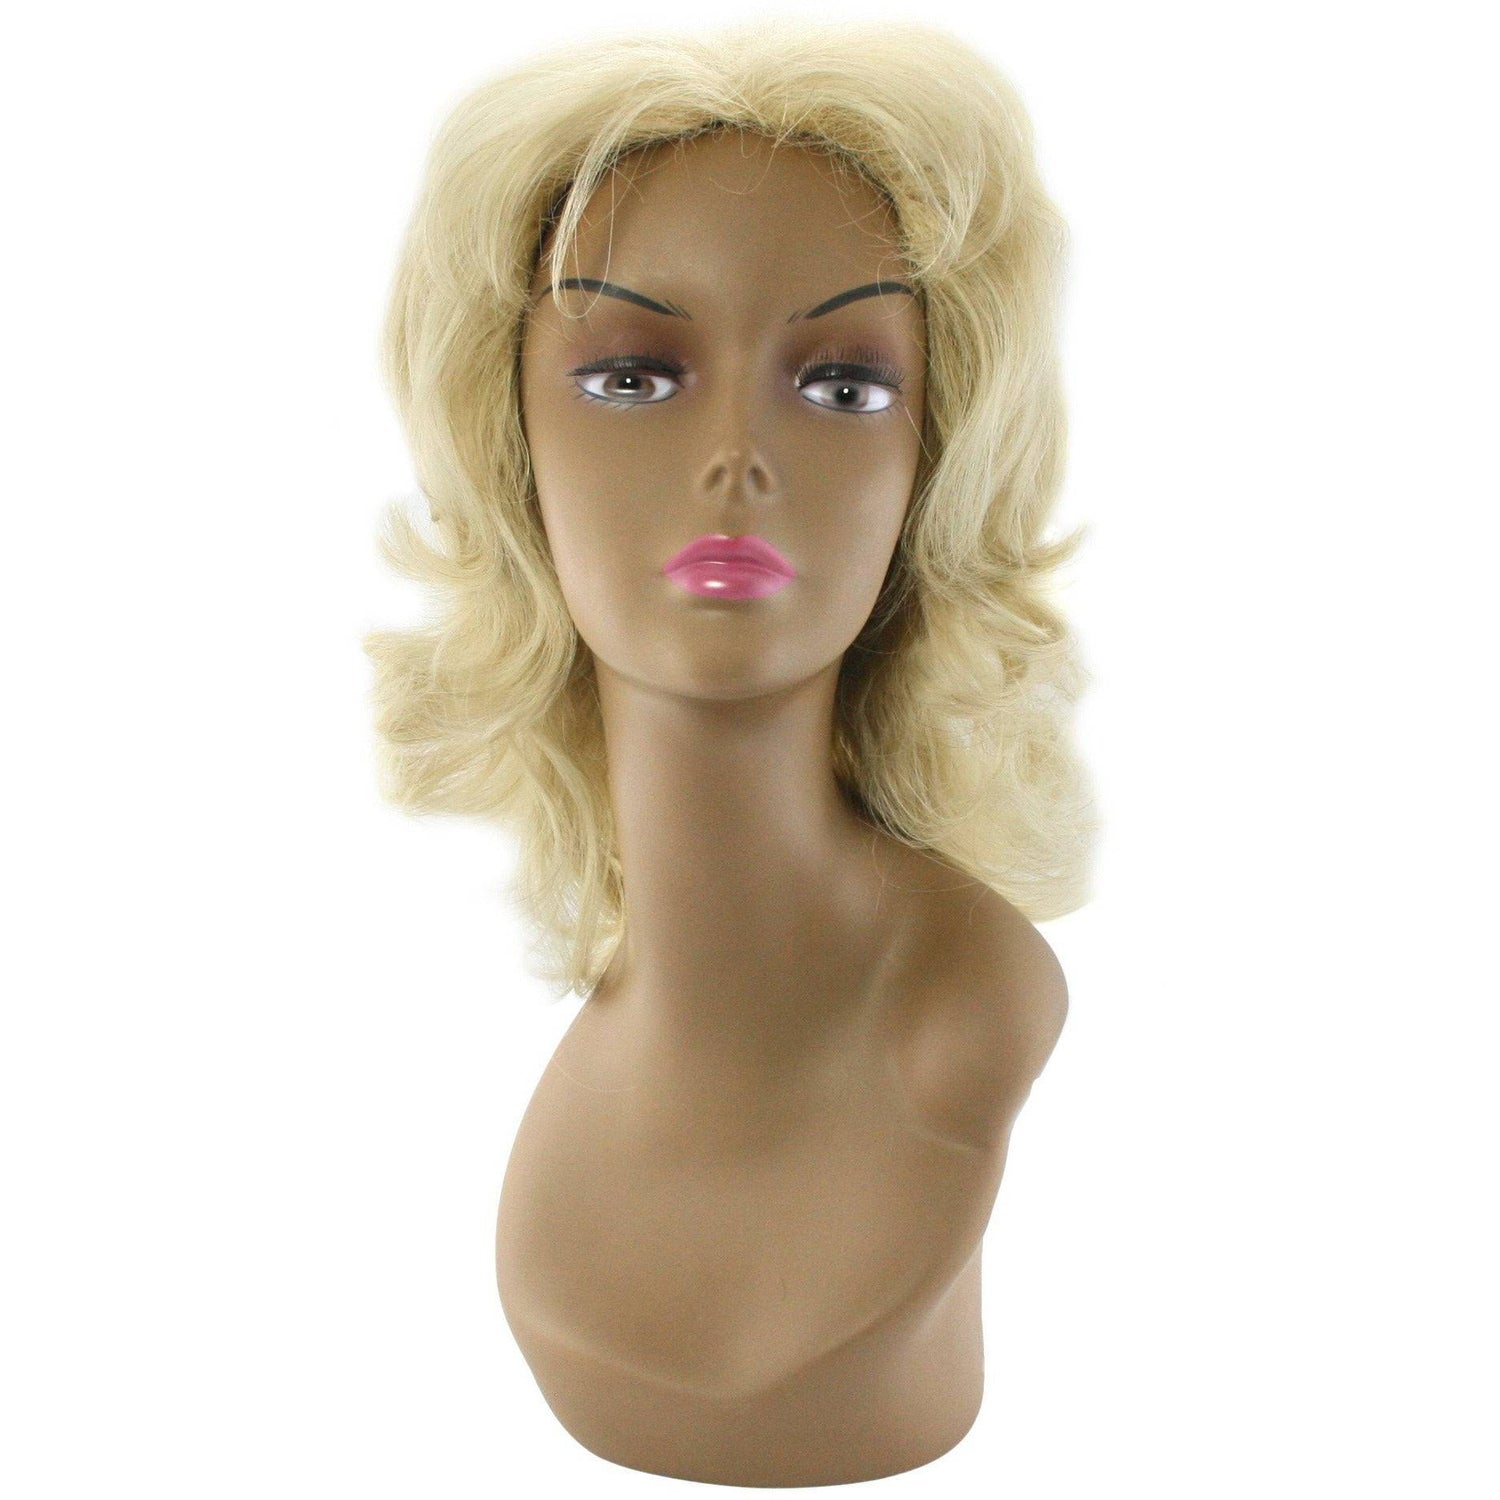 Unique's 100% Human Hair Full Wig / Style "C" - VIP Extensions